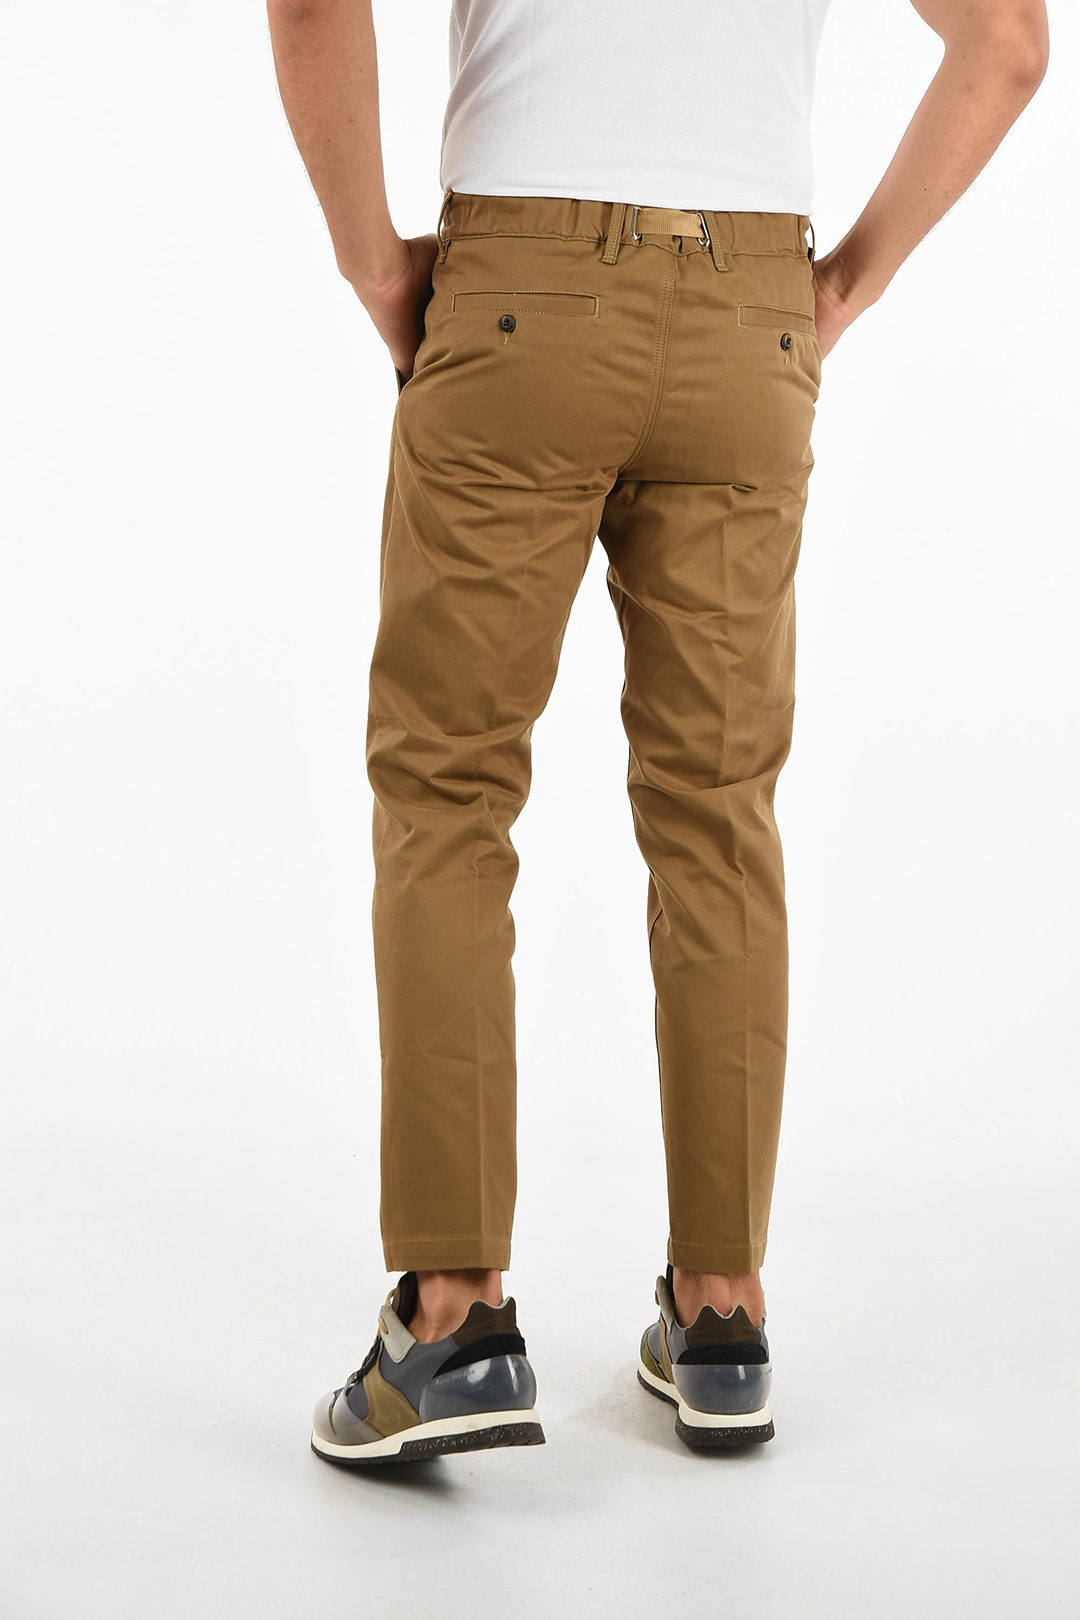 White Sand pants with belt men - Glamood Outlet